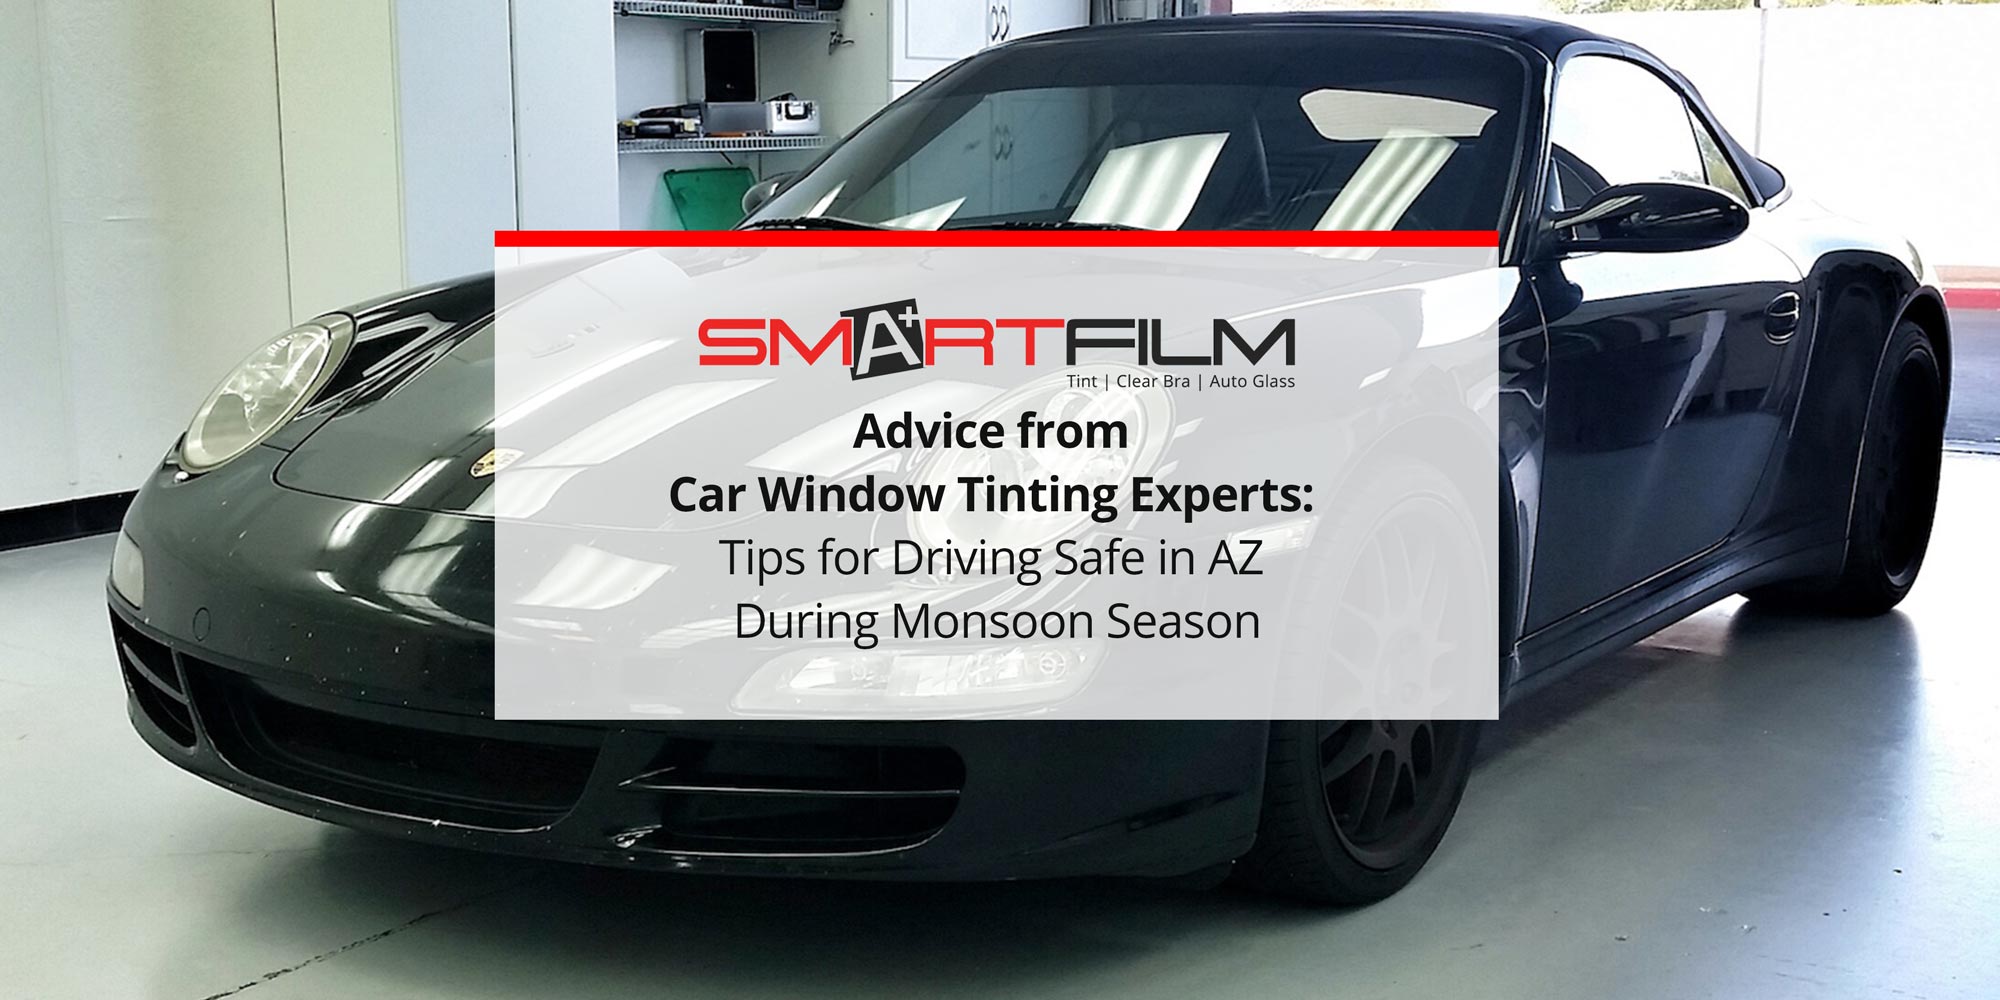 Advice from Car Window Tinting Experts: Tips for Driving Safe in AZ During Monsoon Season